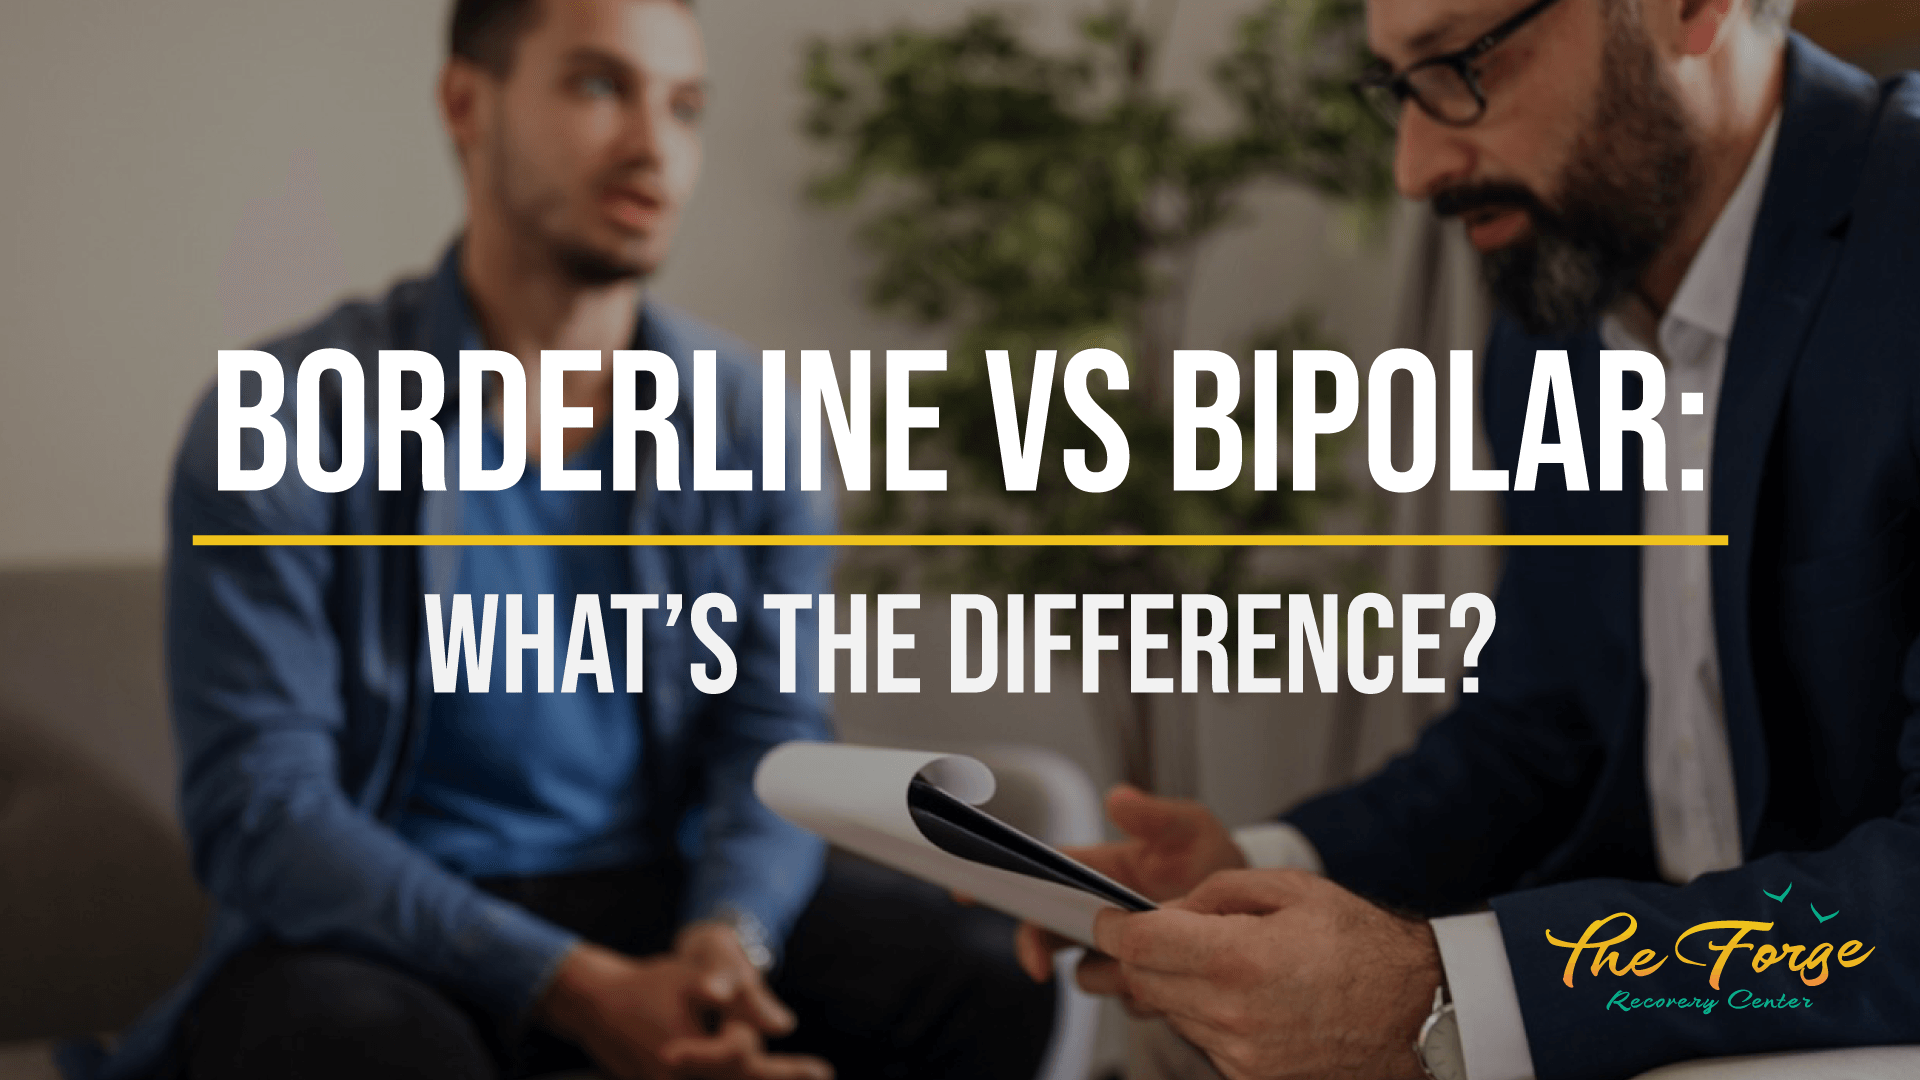 Borderline vs Bipolar: Do You Know the Differences Between Them?